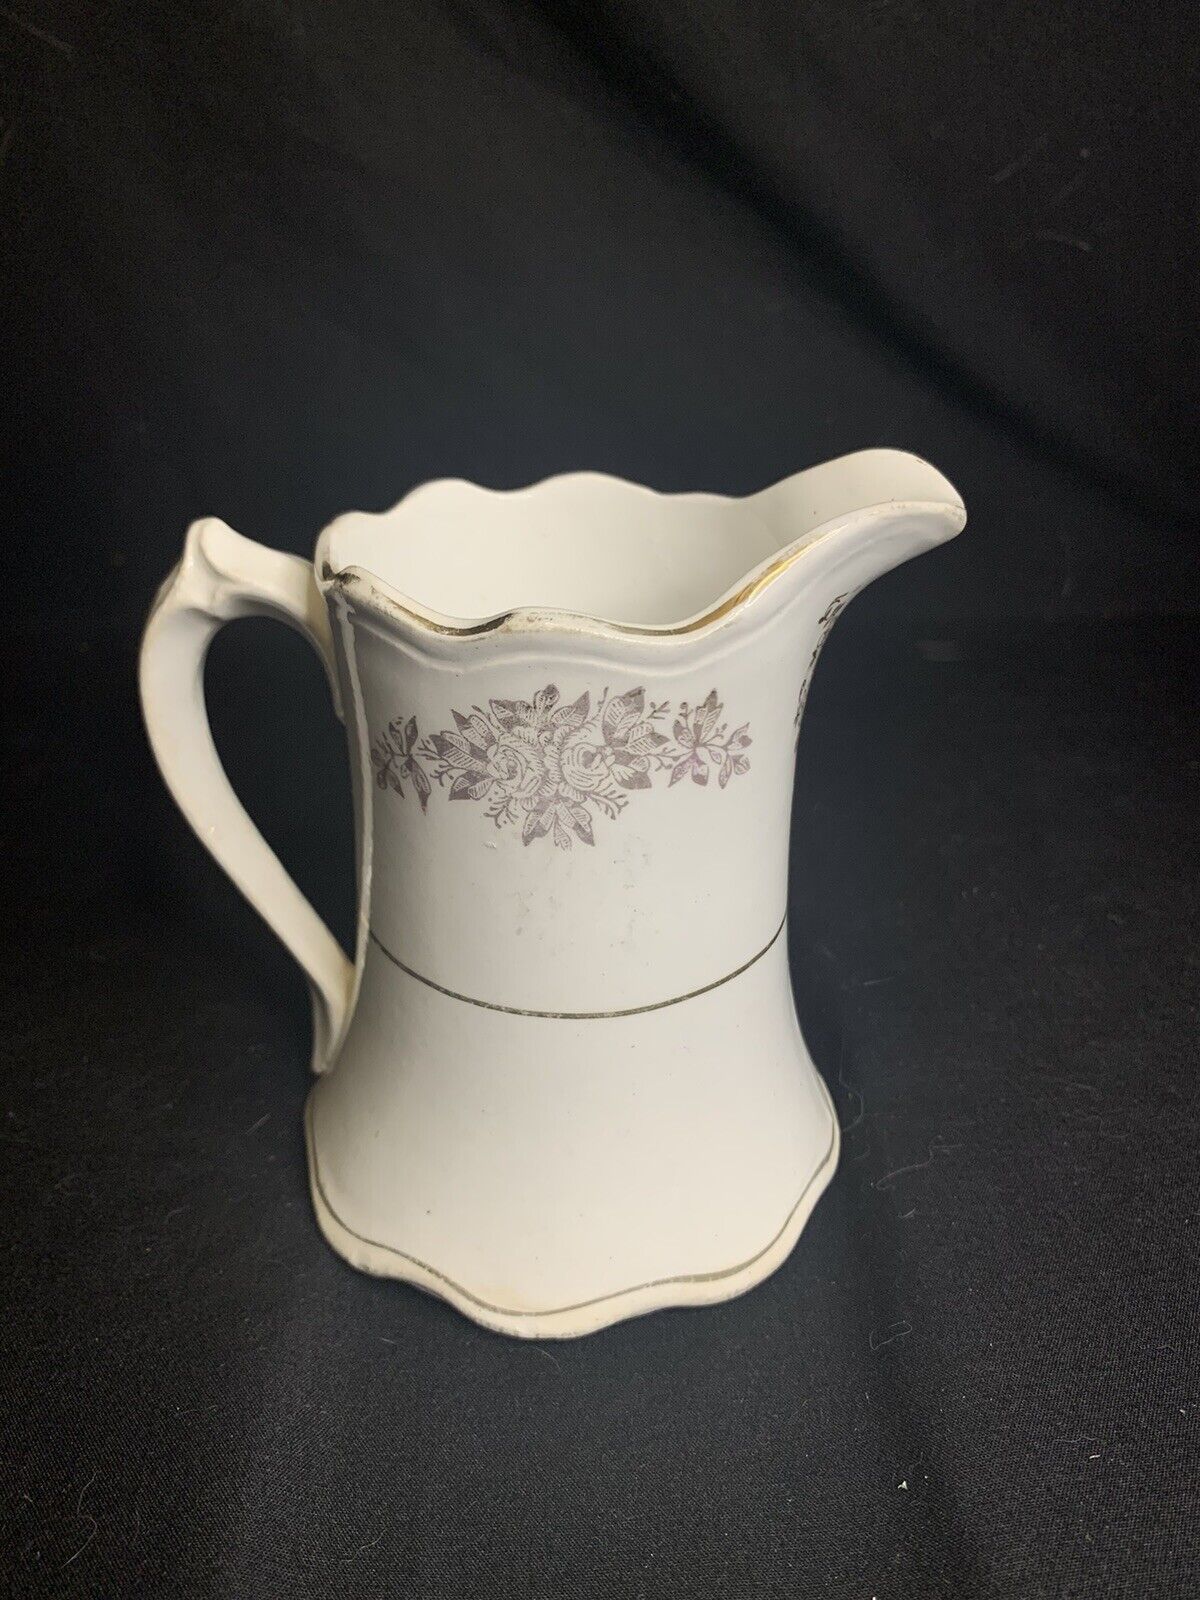 EXTREMELY RARE VINTAGE VODREY CHINA Pitcher 4”